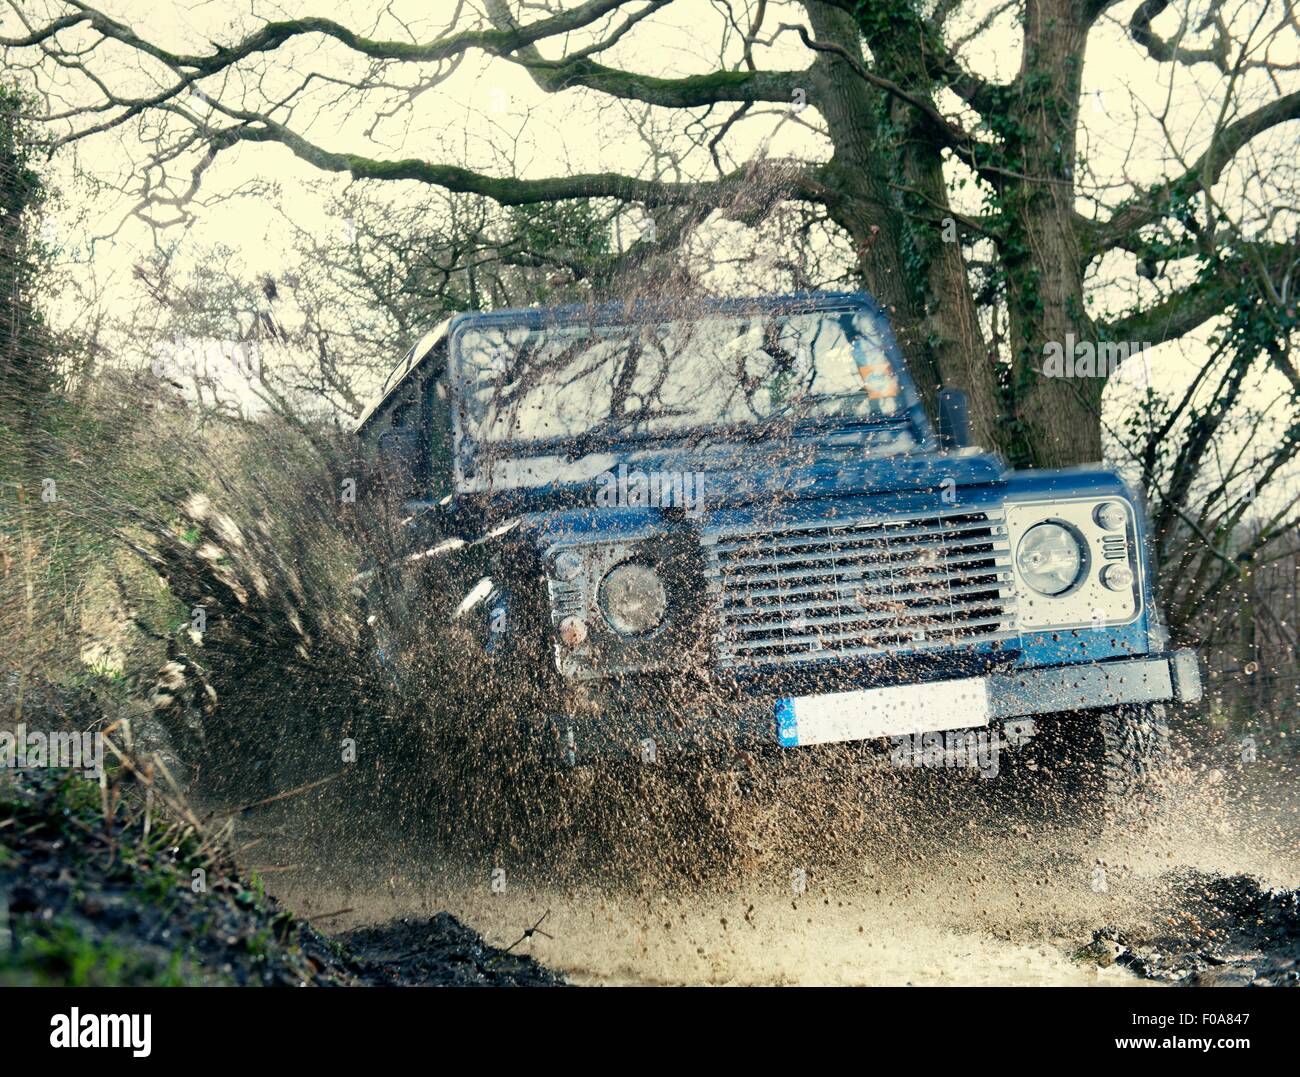 Off road vehicle driving through wet forest, Hampshire, England Stock Photo